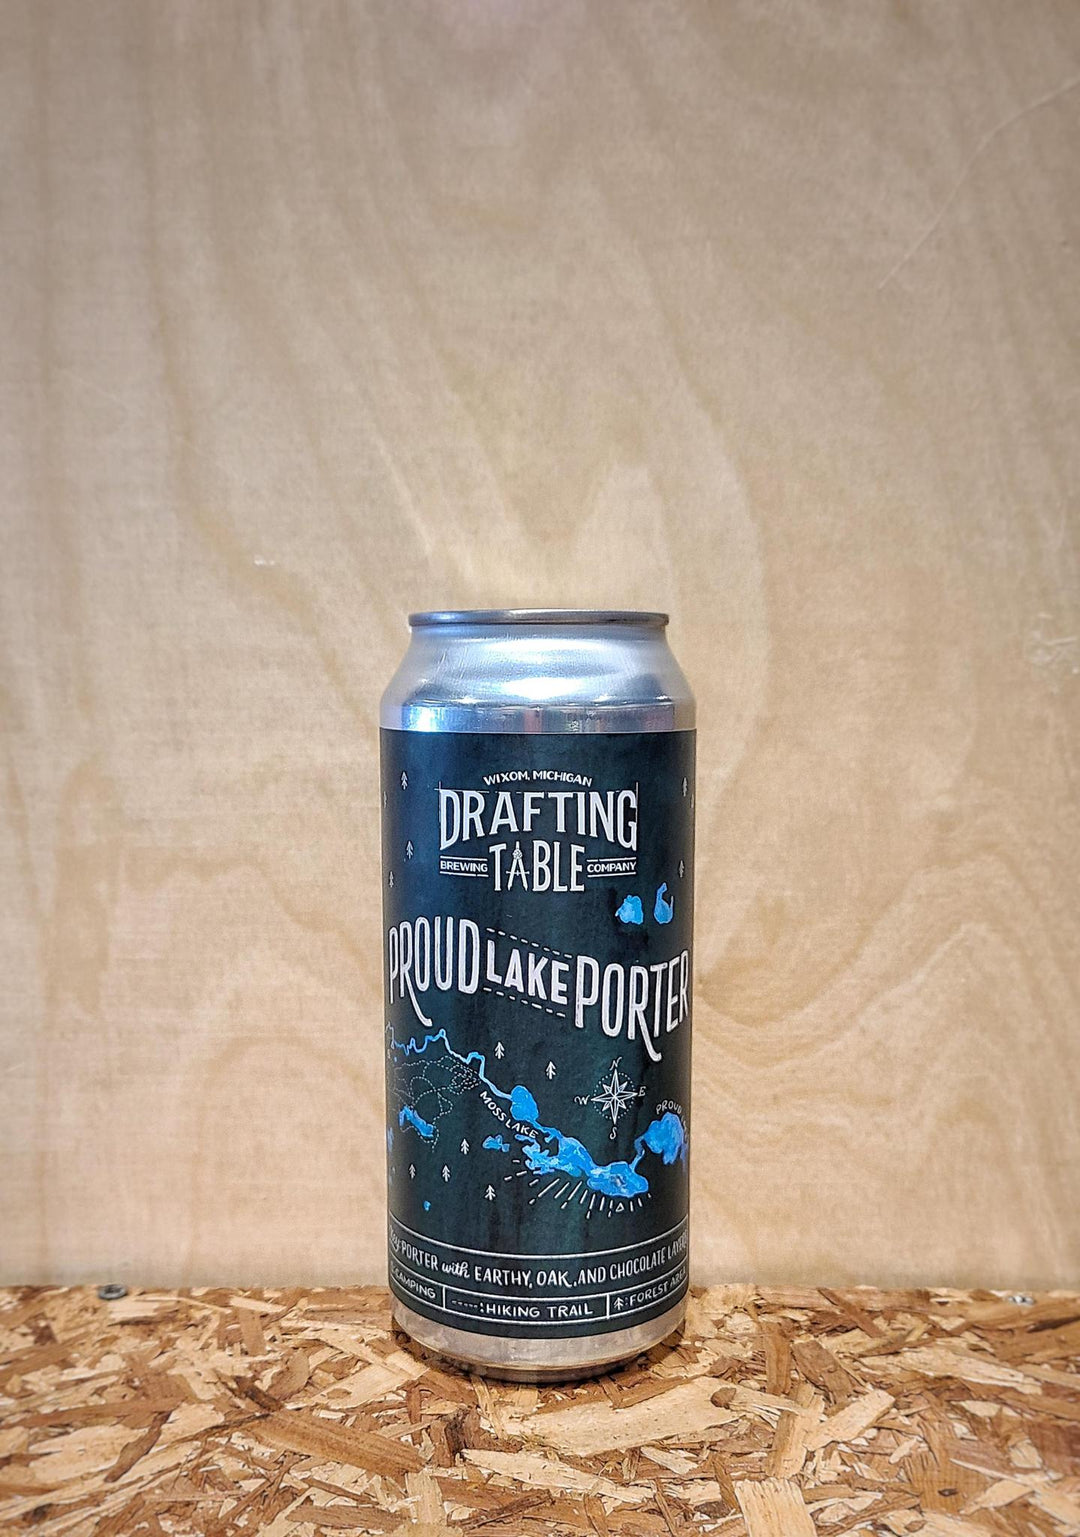 Drafting Table 'Proud Lake Porter' Porter with Earthy, Oak, and Chocolate Layers (Wixom, MI)